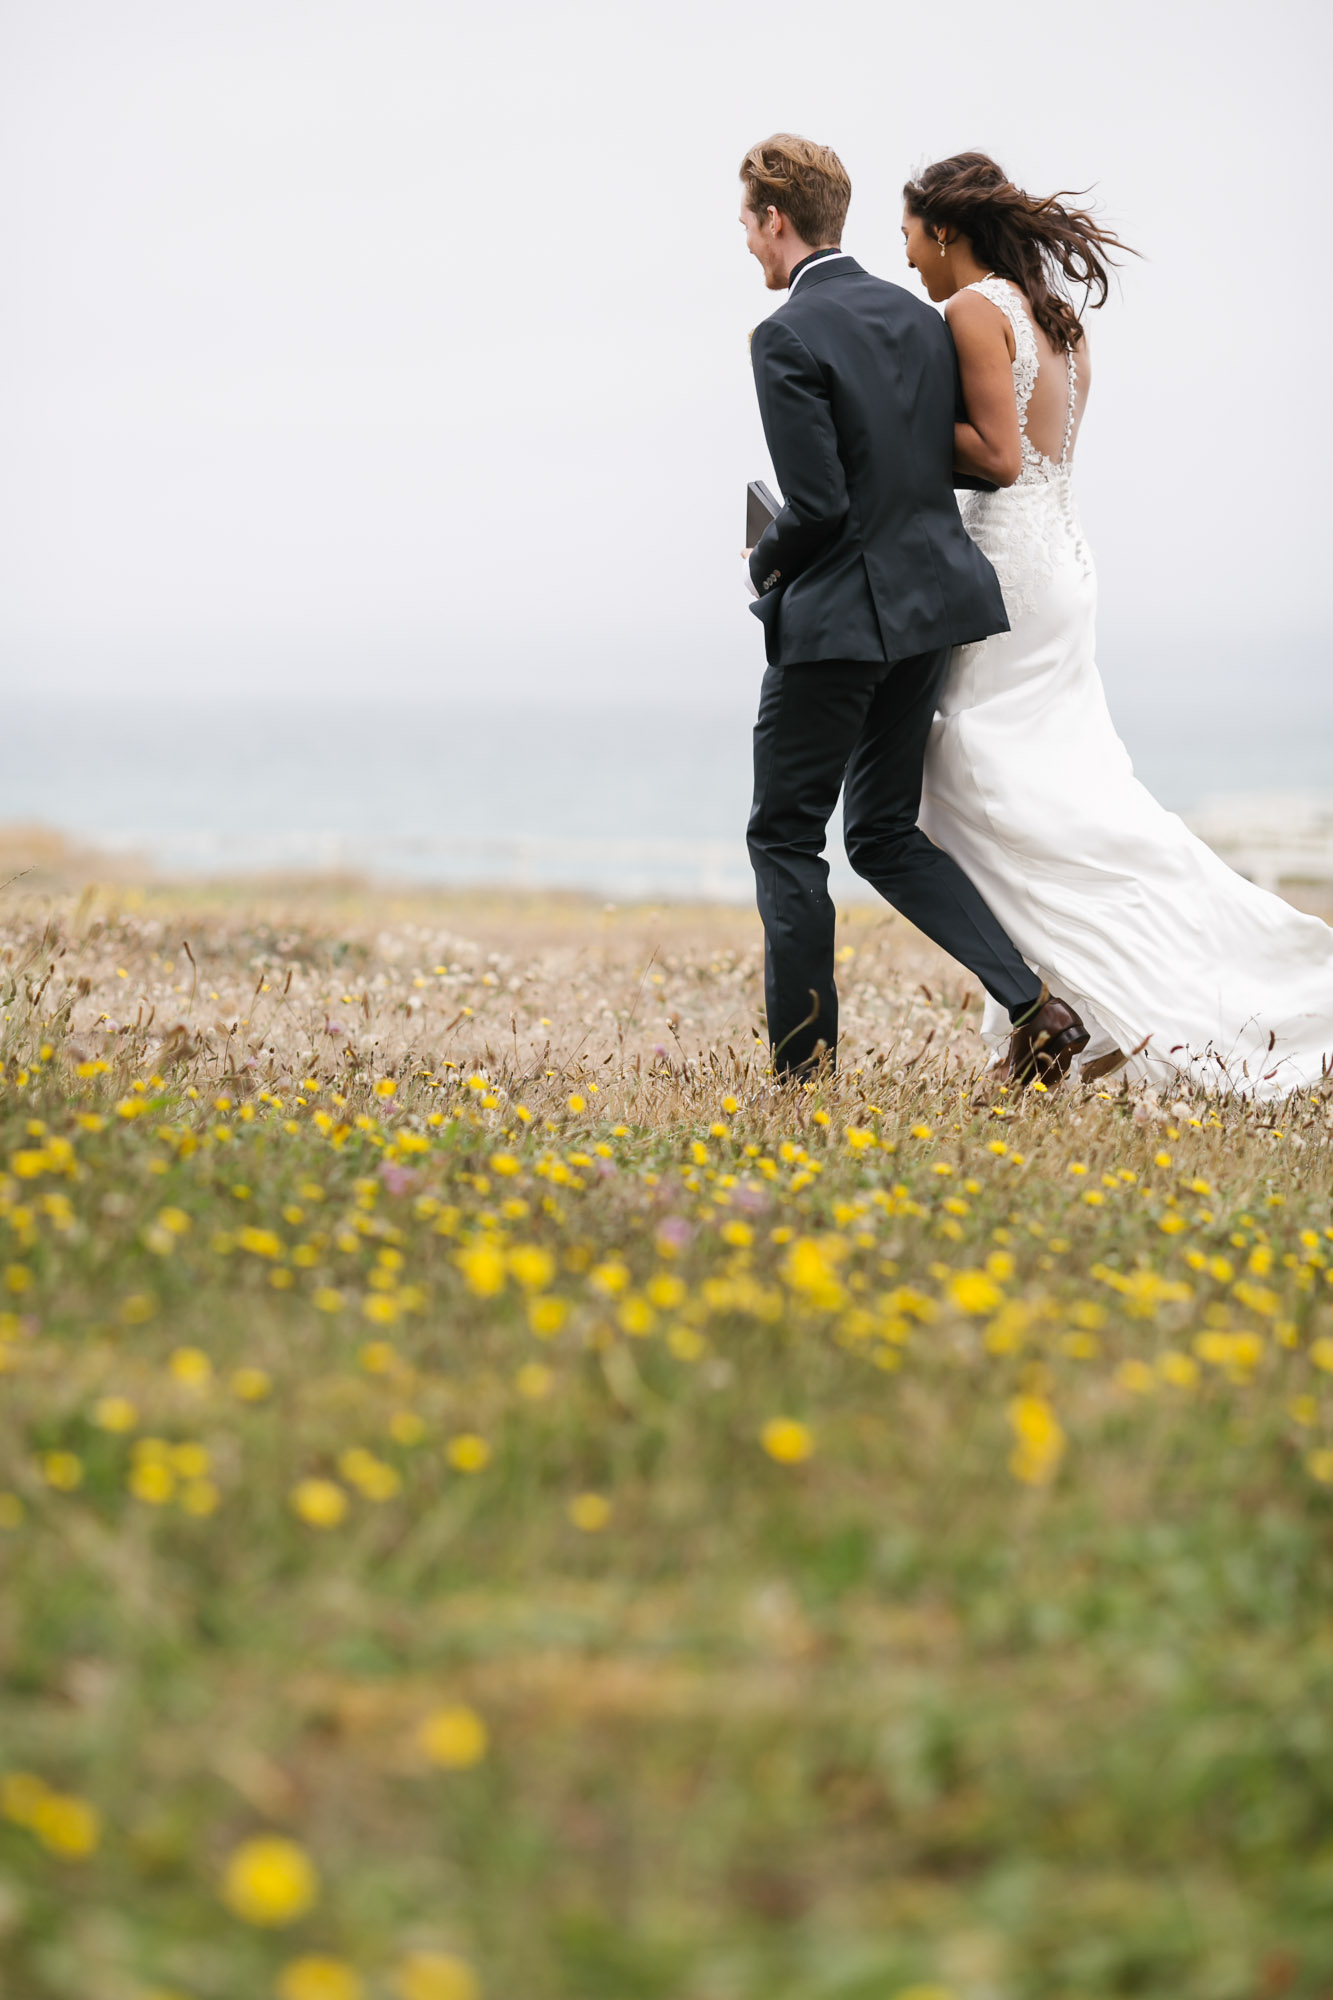 Wedding couple walk away together in field of wildflowers